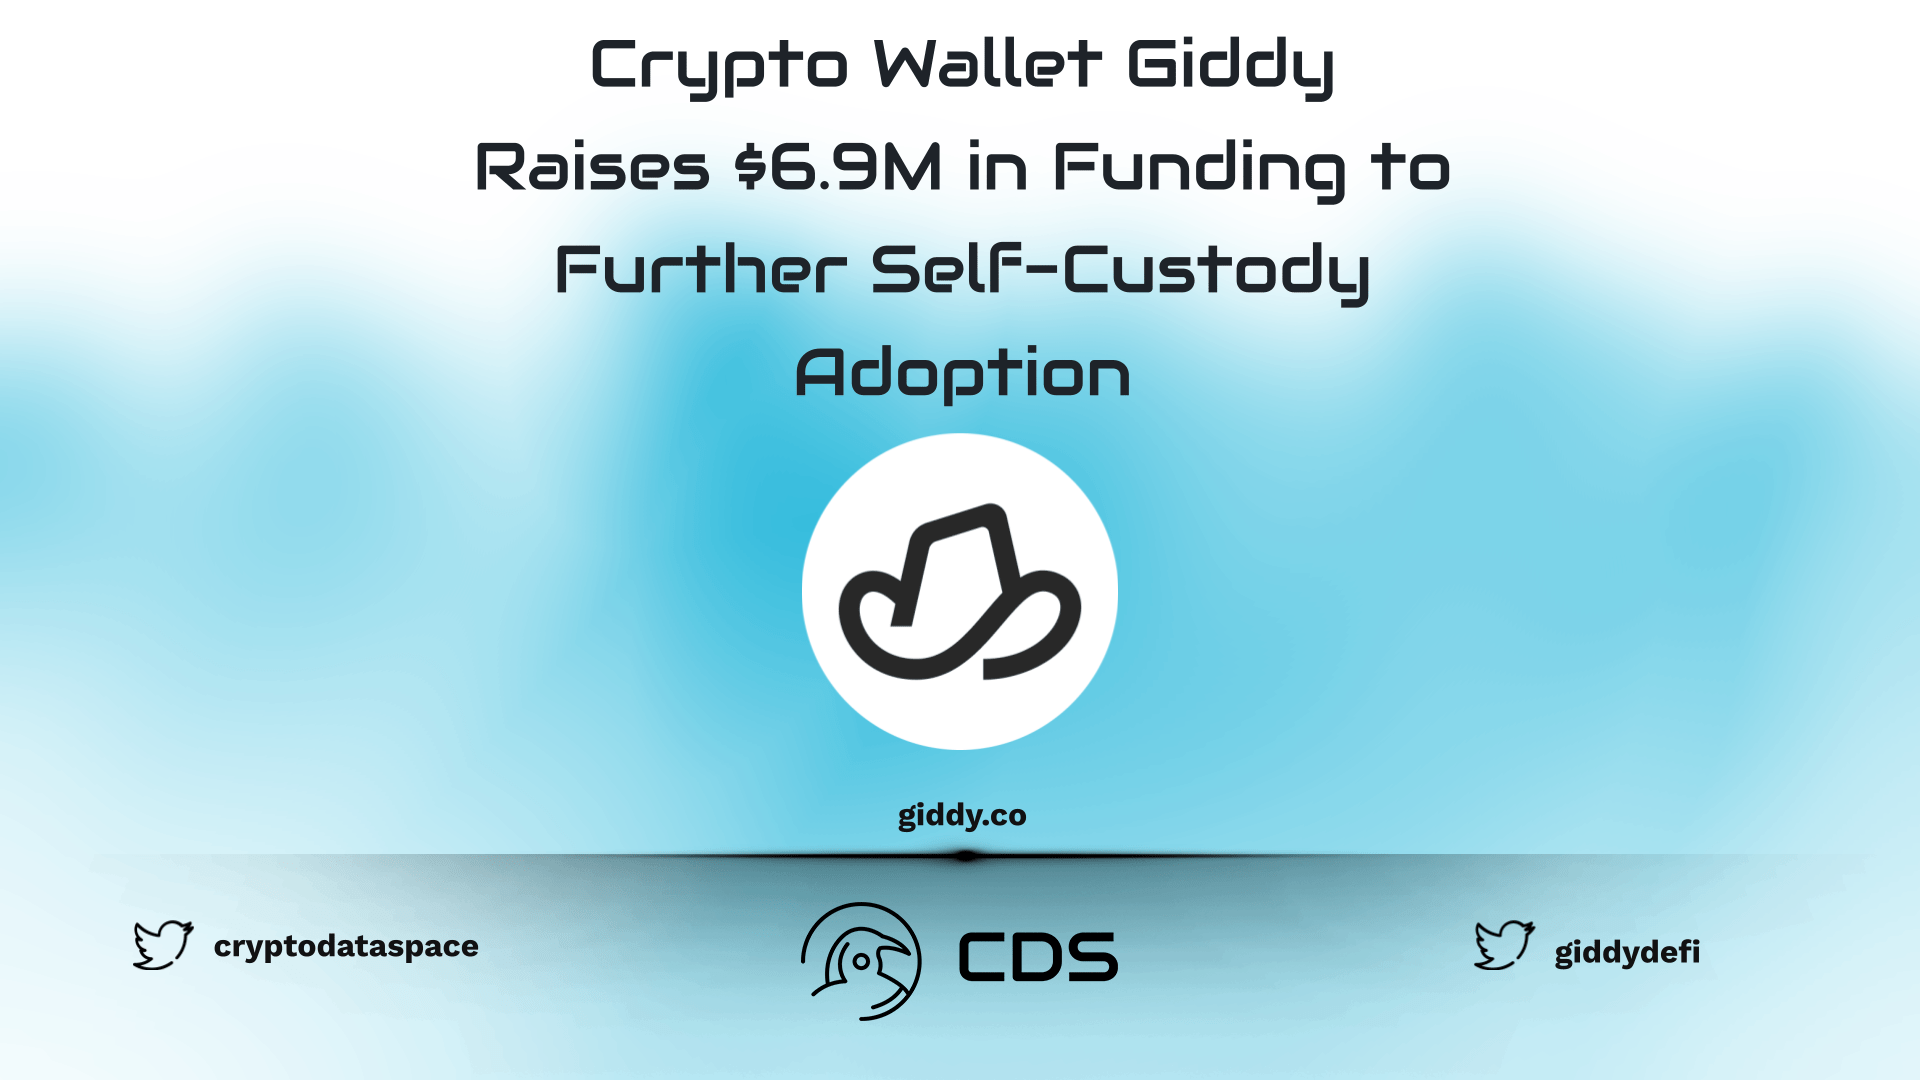 Crypto Wallet Giddy Raises $6.9M in Funding to Further Self-Custody Adoption